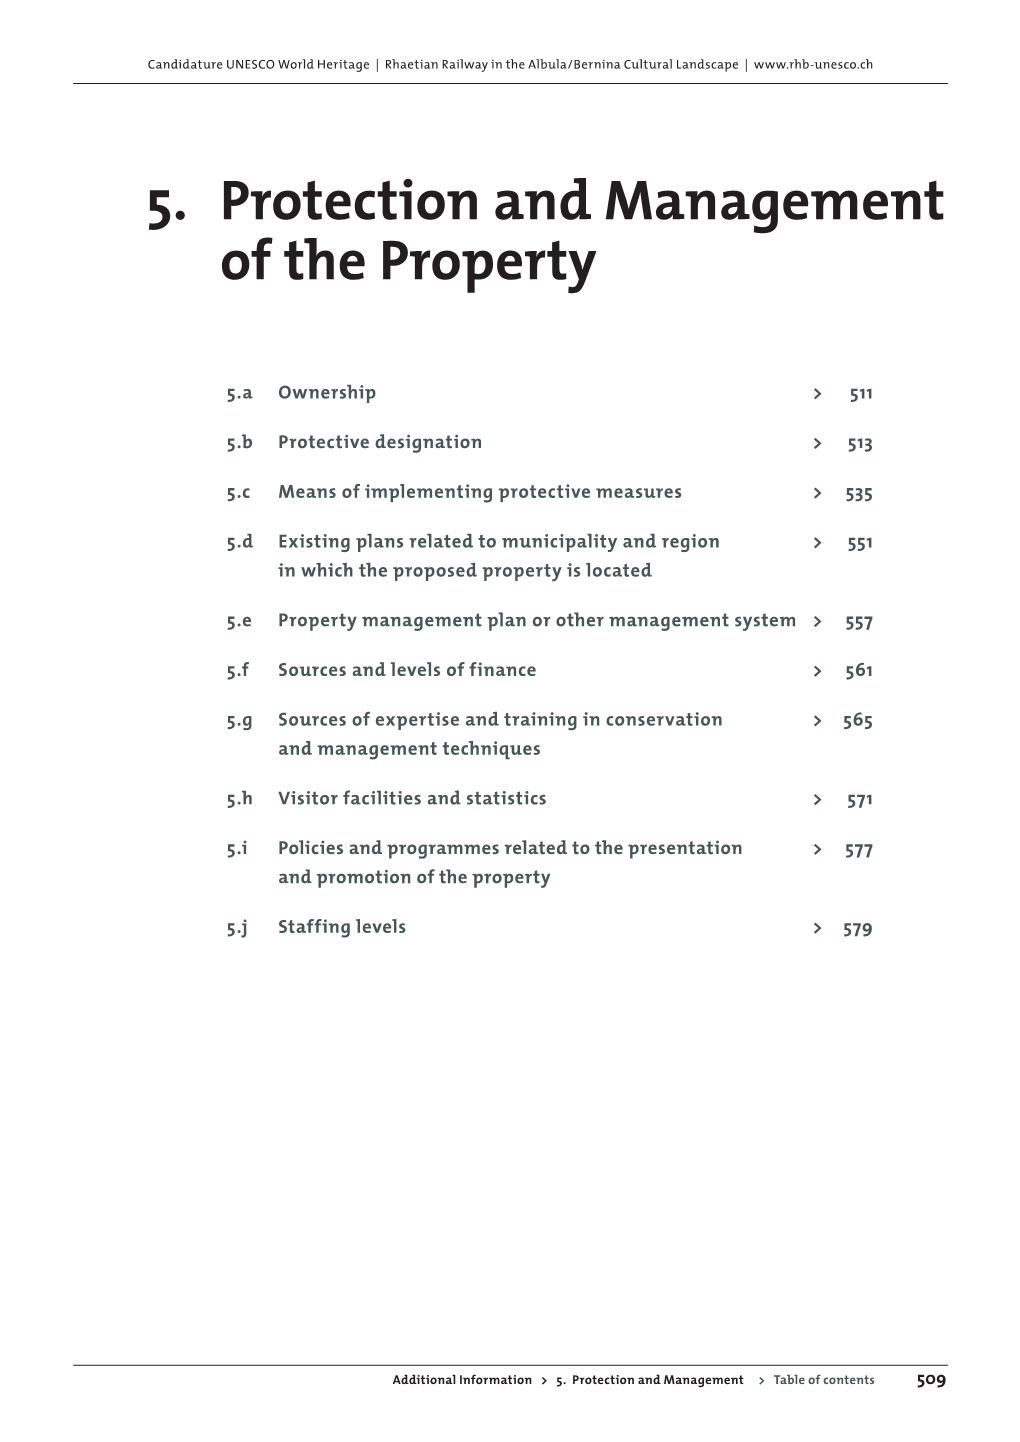 5. Protection and Management of the Property